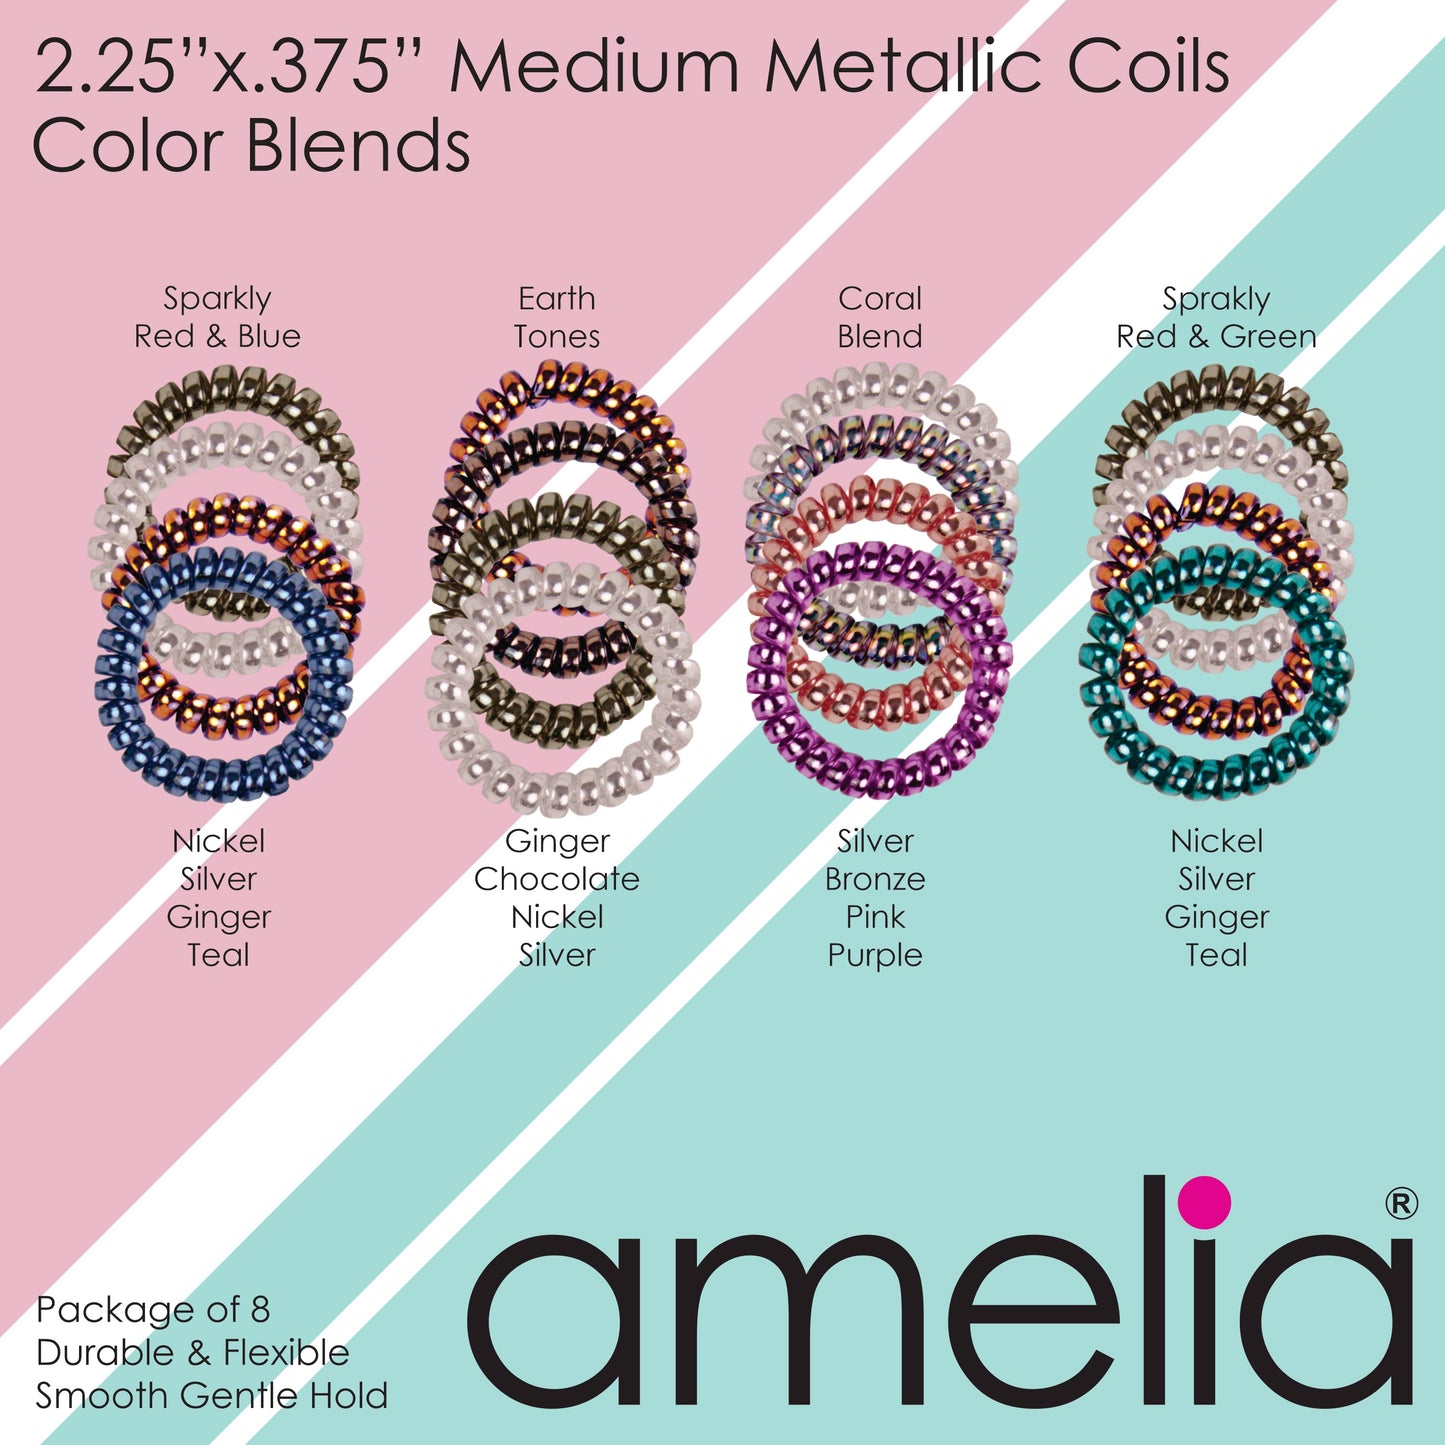 Amelia Beauty Products 8 Medium Smooth Elastic Hair Coils, 2.25in Diameter Spiral Hair Ties, Gentle on Hair, Strong Hold and Minimizes Dents and Creases, Pink